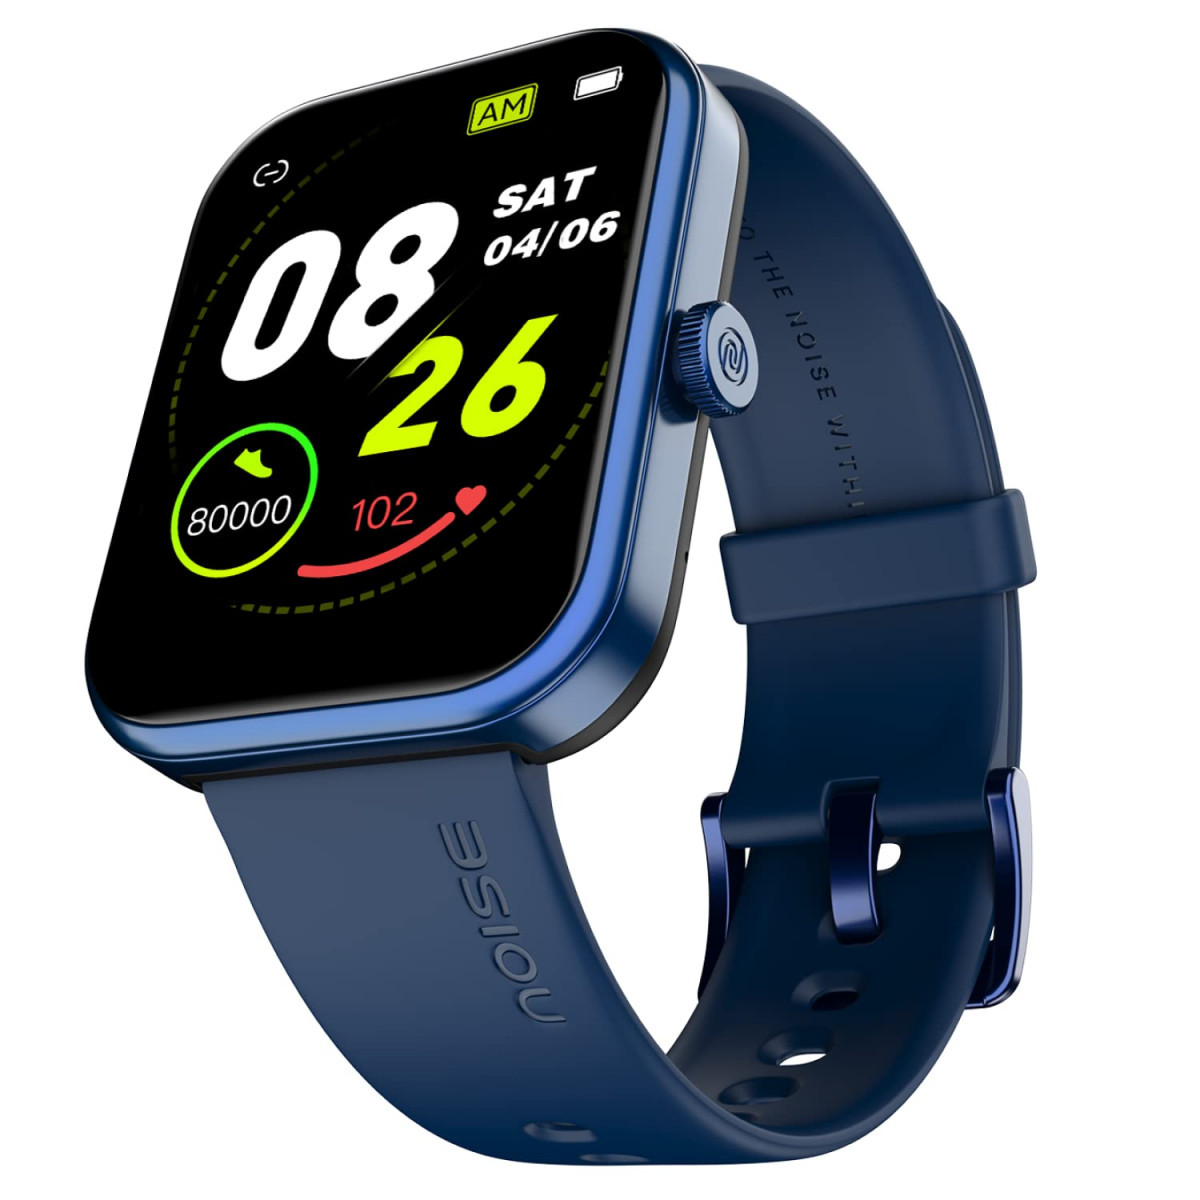 Noise Pulse 2 Max 185 Display Bluetooth Calling Smart Watch 10 Days Battery 550 NITS Brightness Smart DND